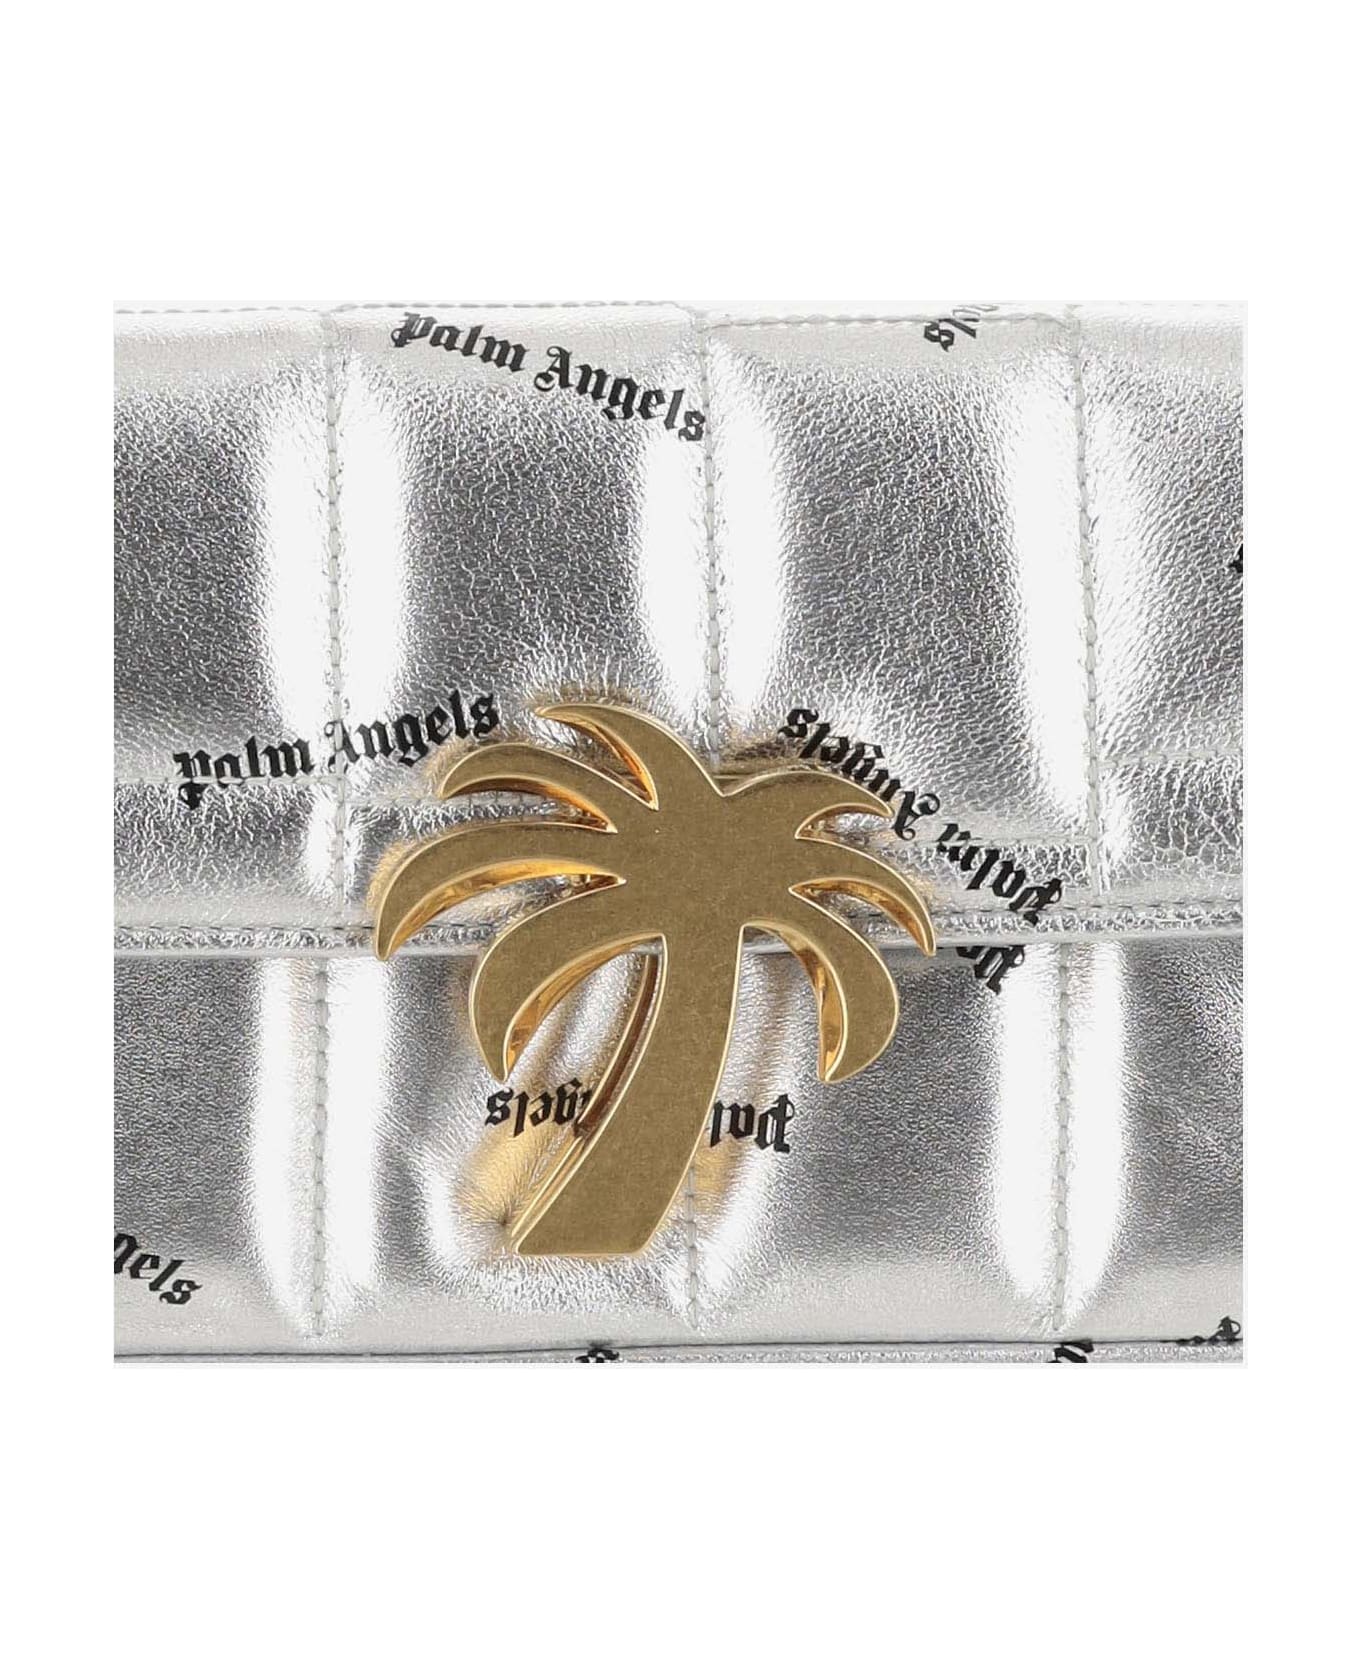 Palm Angels Metallic Leather Palm Bag - Silver